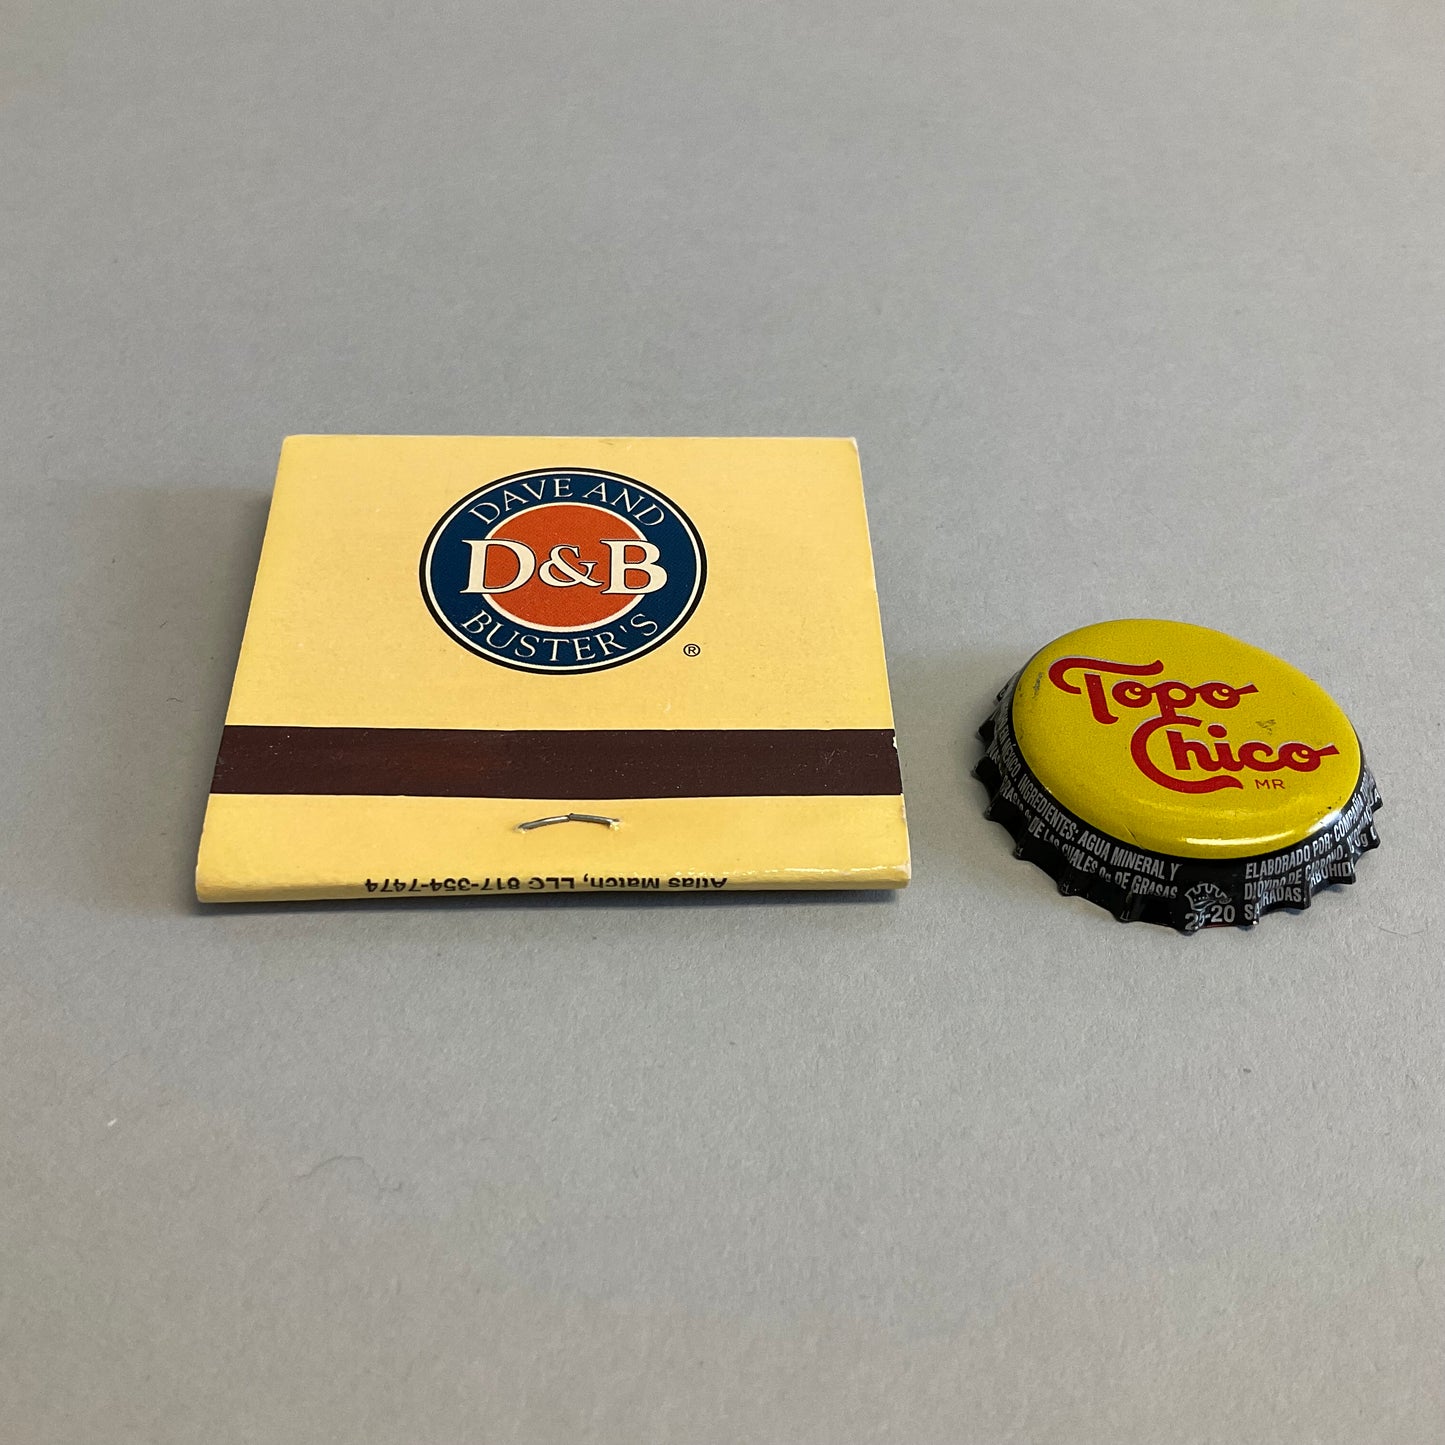 Dave and Buster’s Matchbook